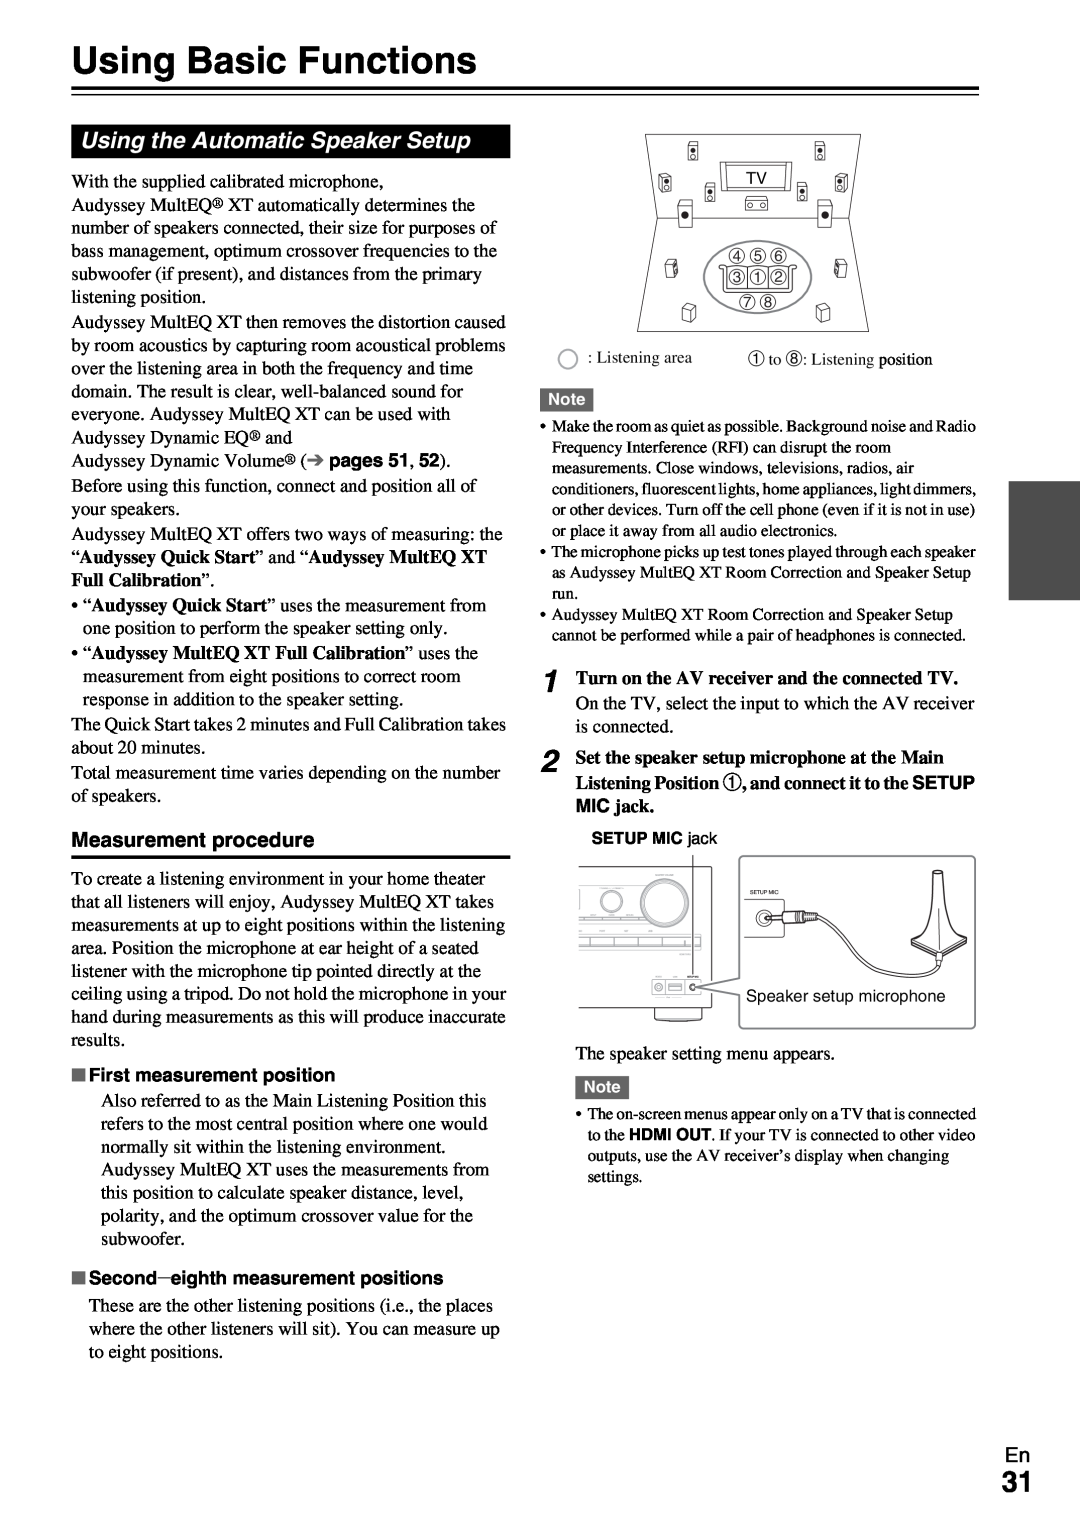 Onkyo HT-RC370 instruction manual Using Basic Functions, Using the Automatic Speaker Setup, First measurement position 